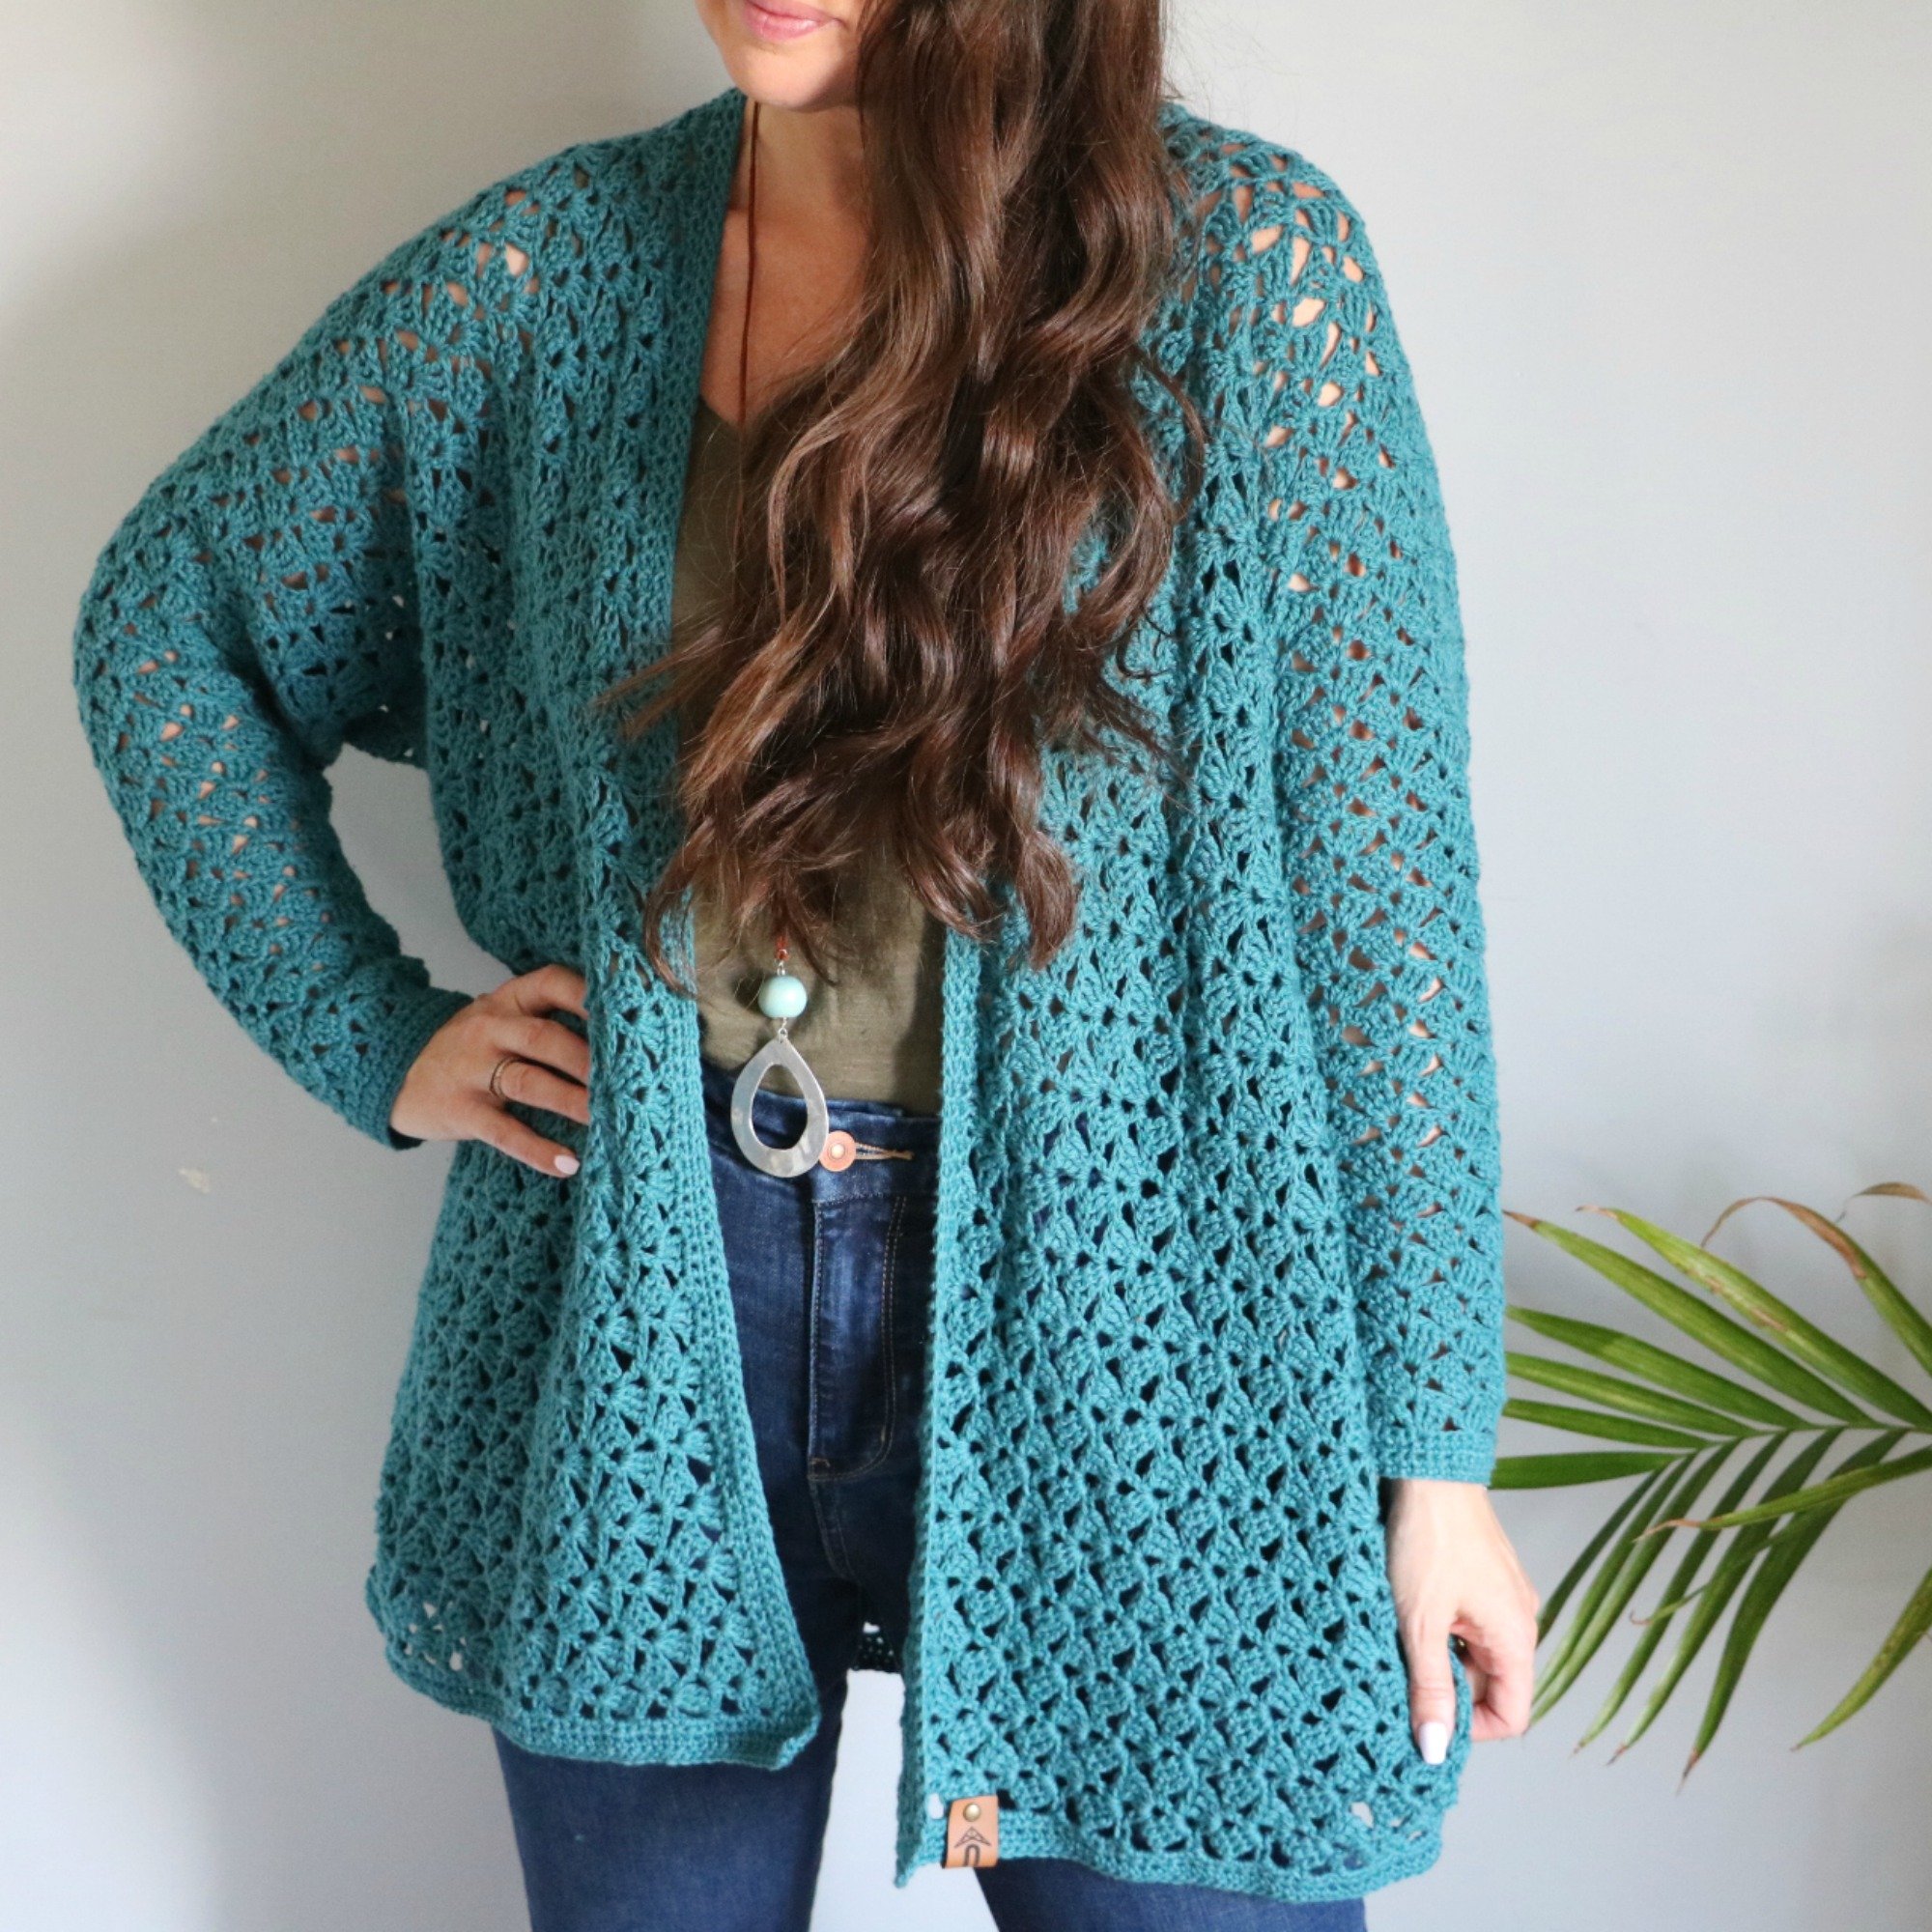 Crochet an Easy Lacy Spring Cardigan - MJ's off the Hook Designs